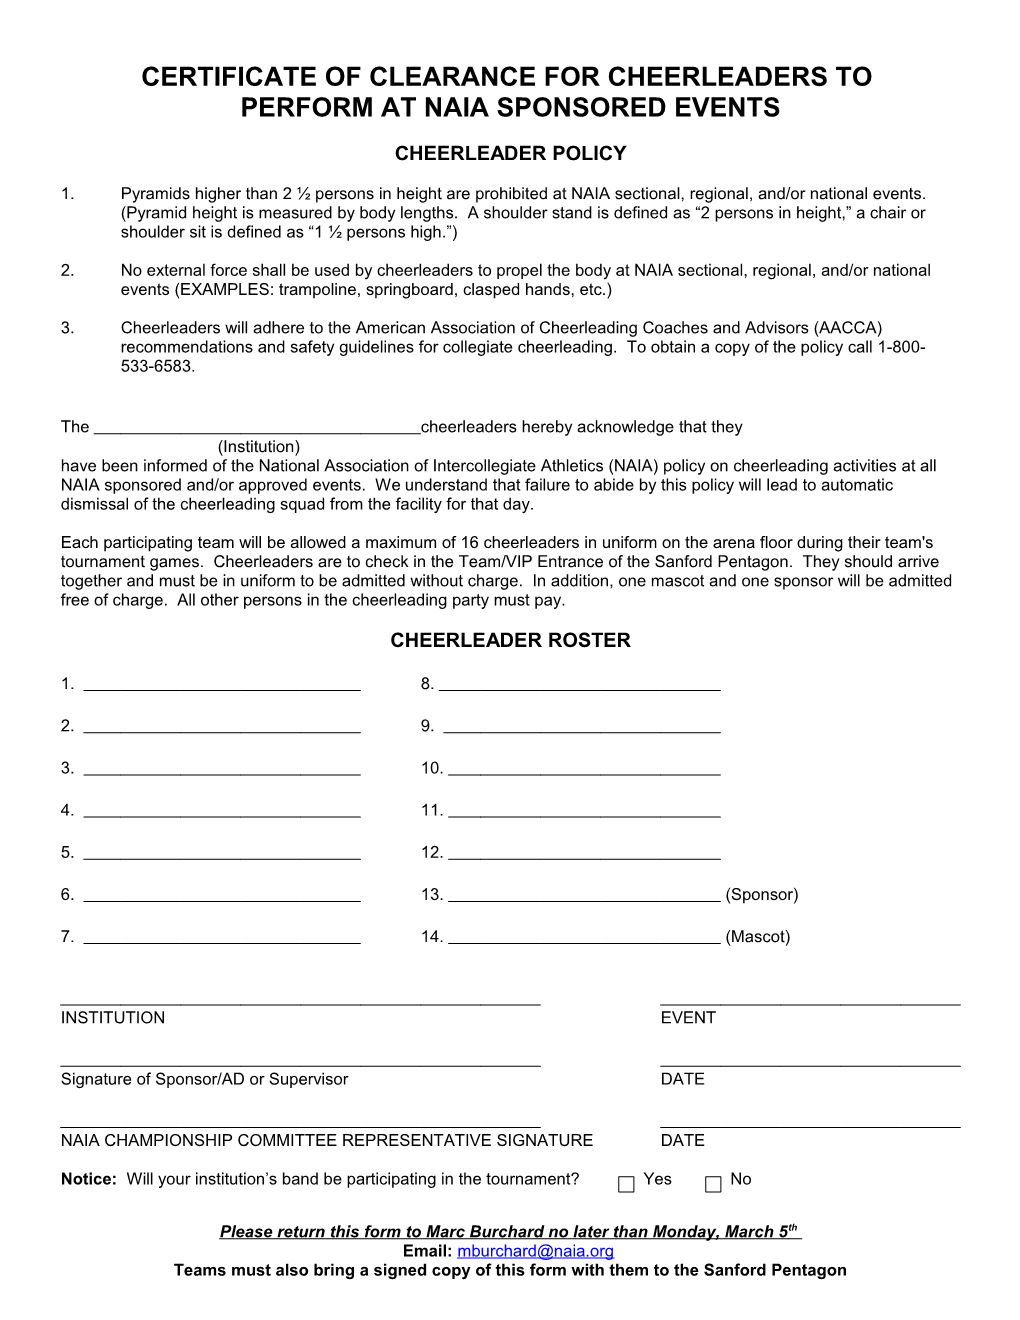 Certificate of Clearance for Cheerleaders To